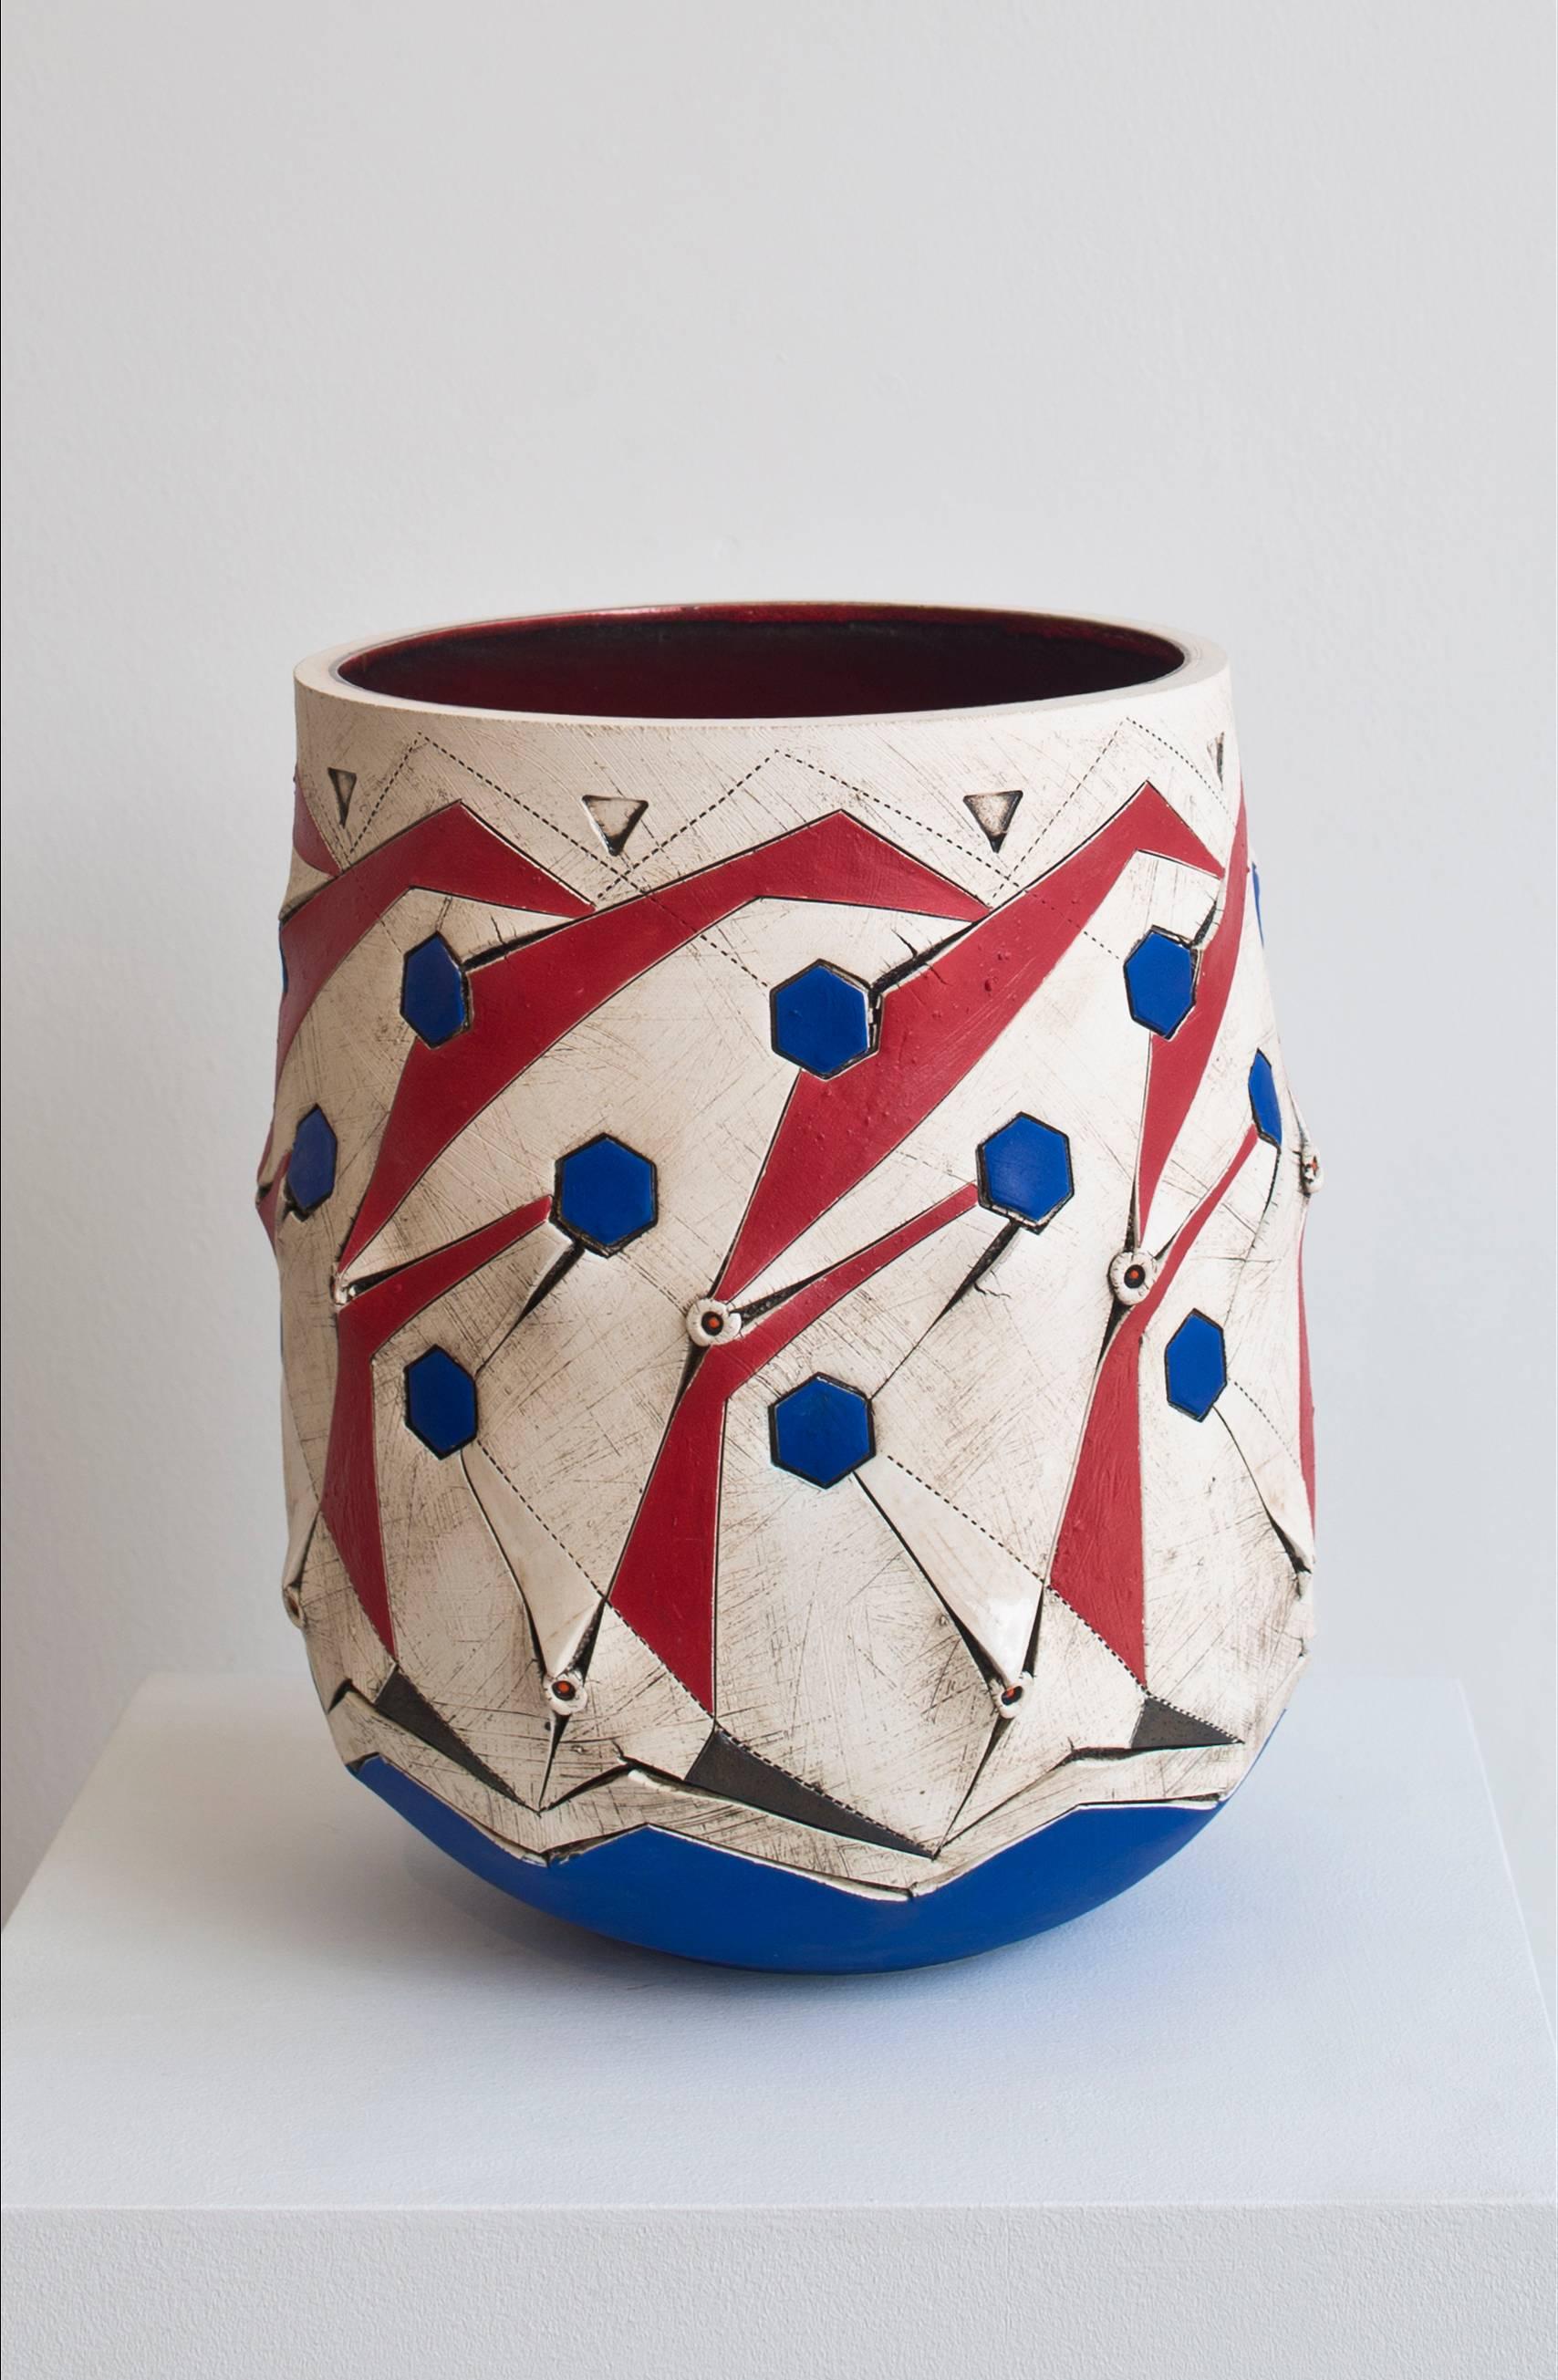 Andile Dyalvane Abstract Sculpture - Scarified Red Blue Honeycomb Vase